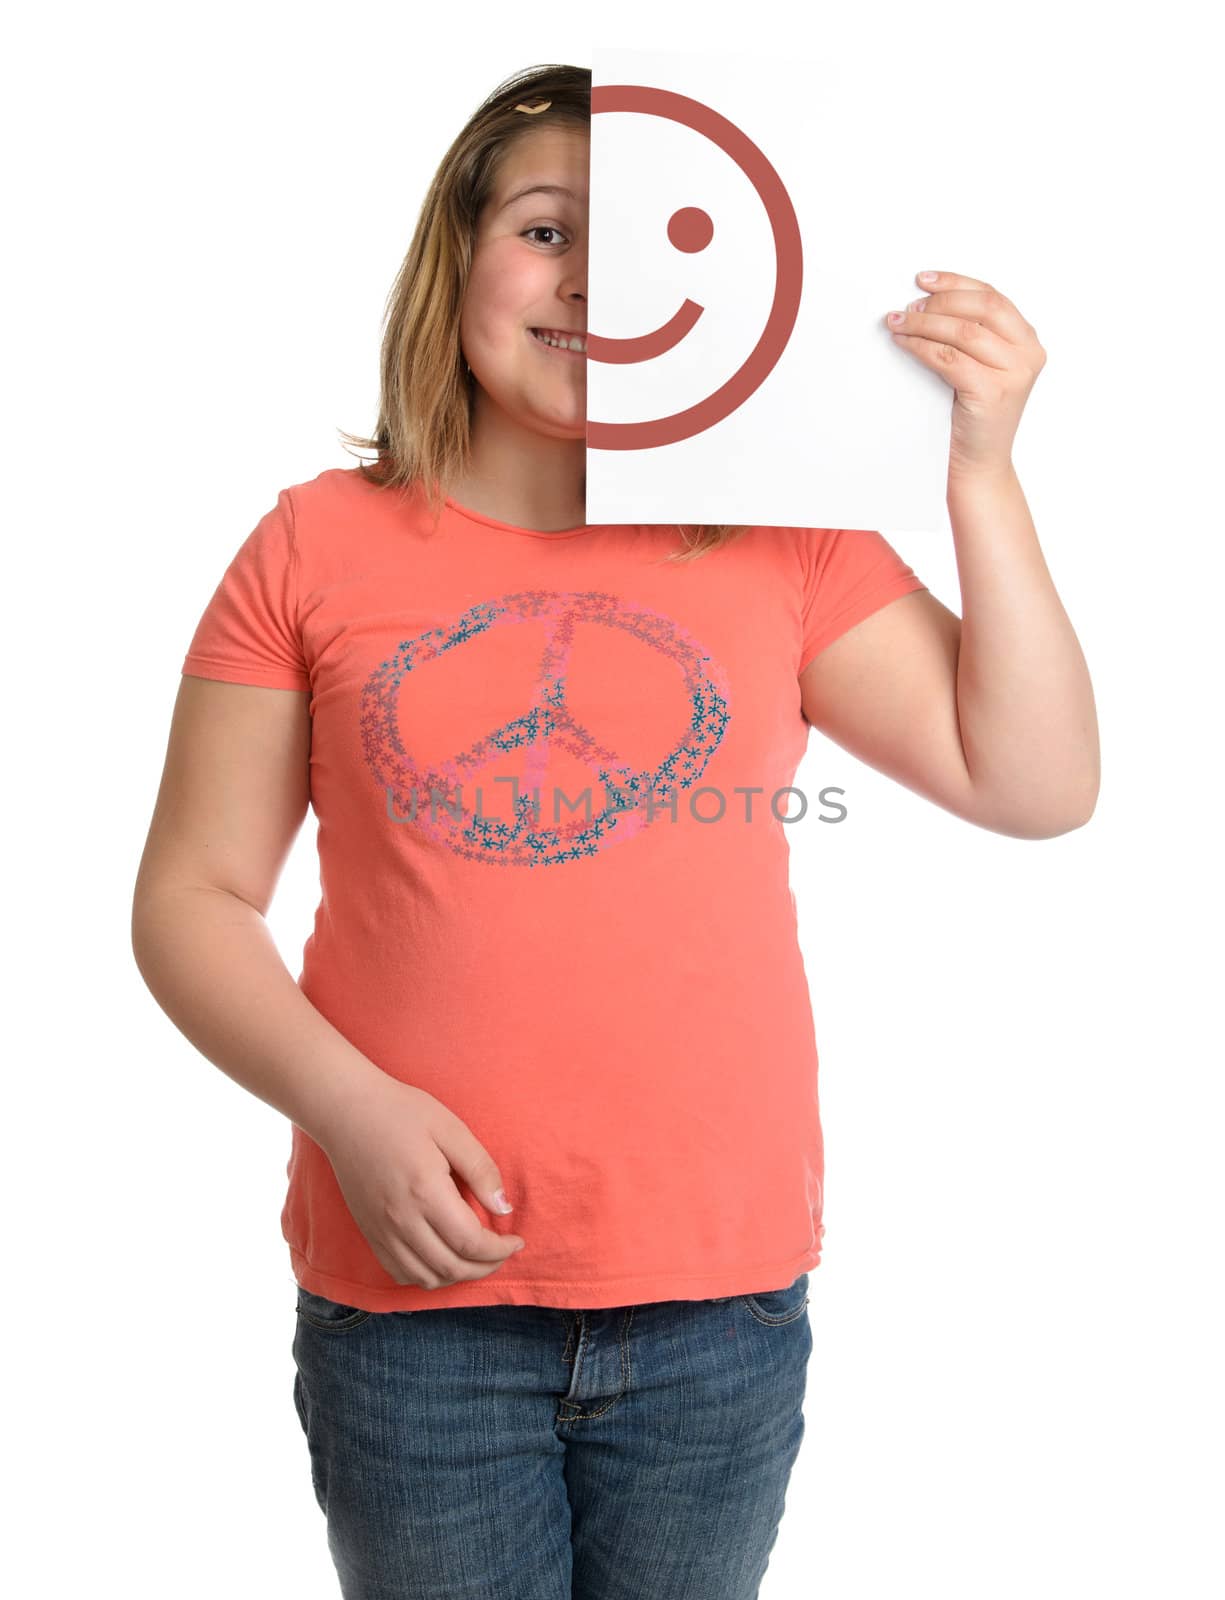 A happy smiling girl is holding up a white piece of paper with half a happy face on it.